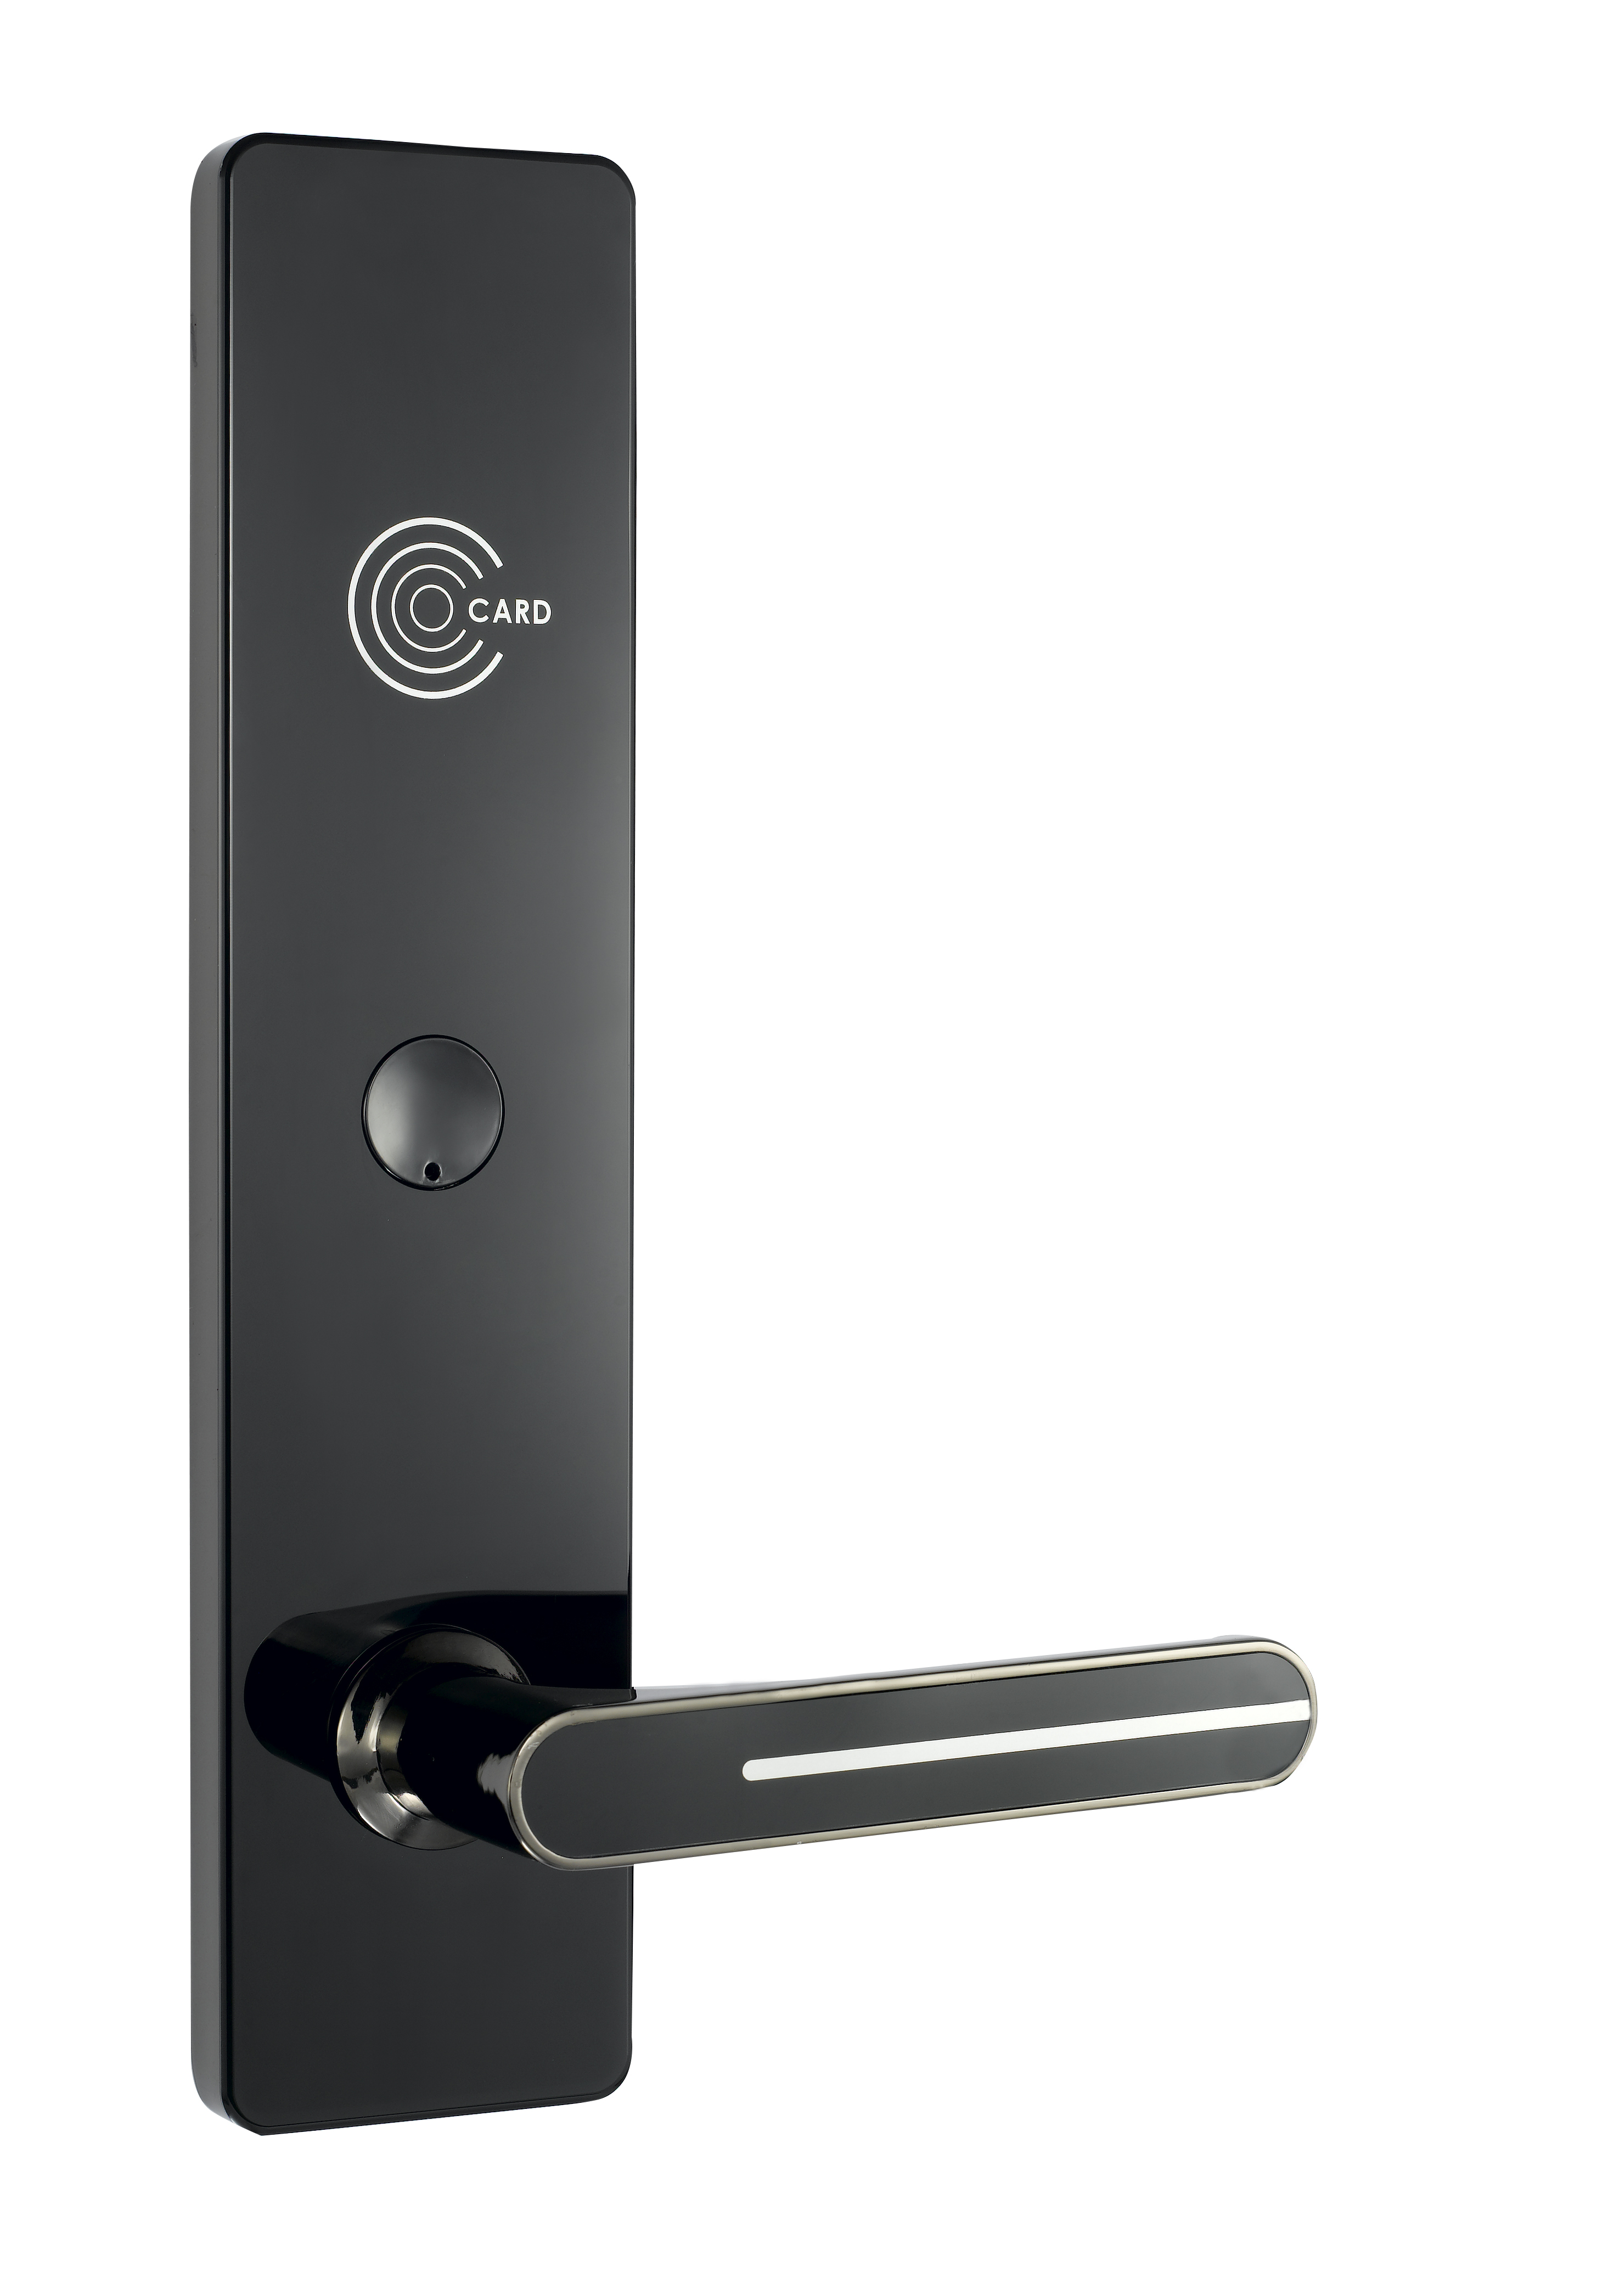 Mifare card hotel type room lock system